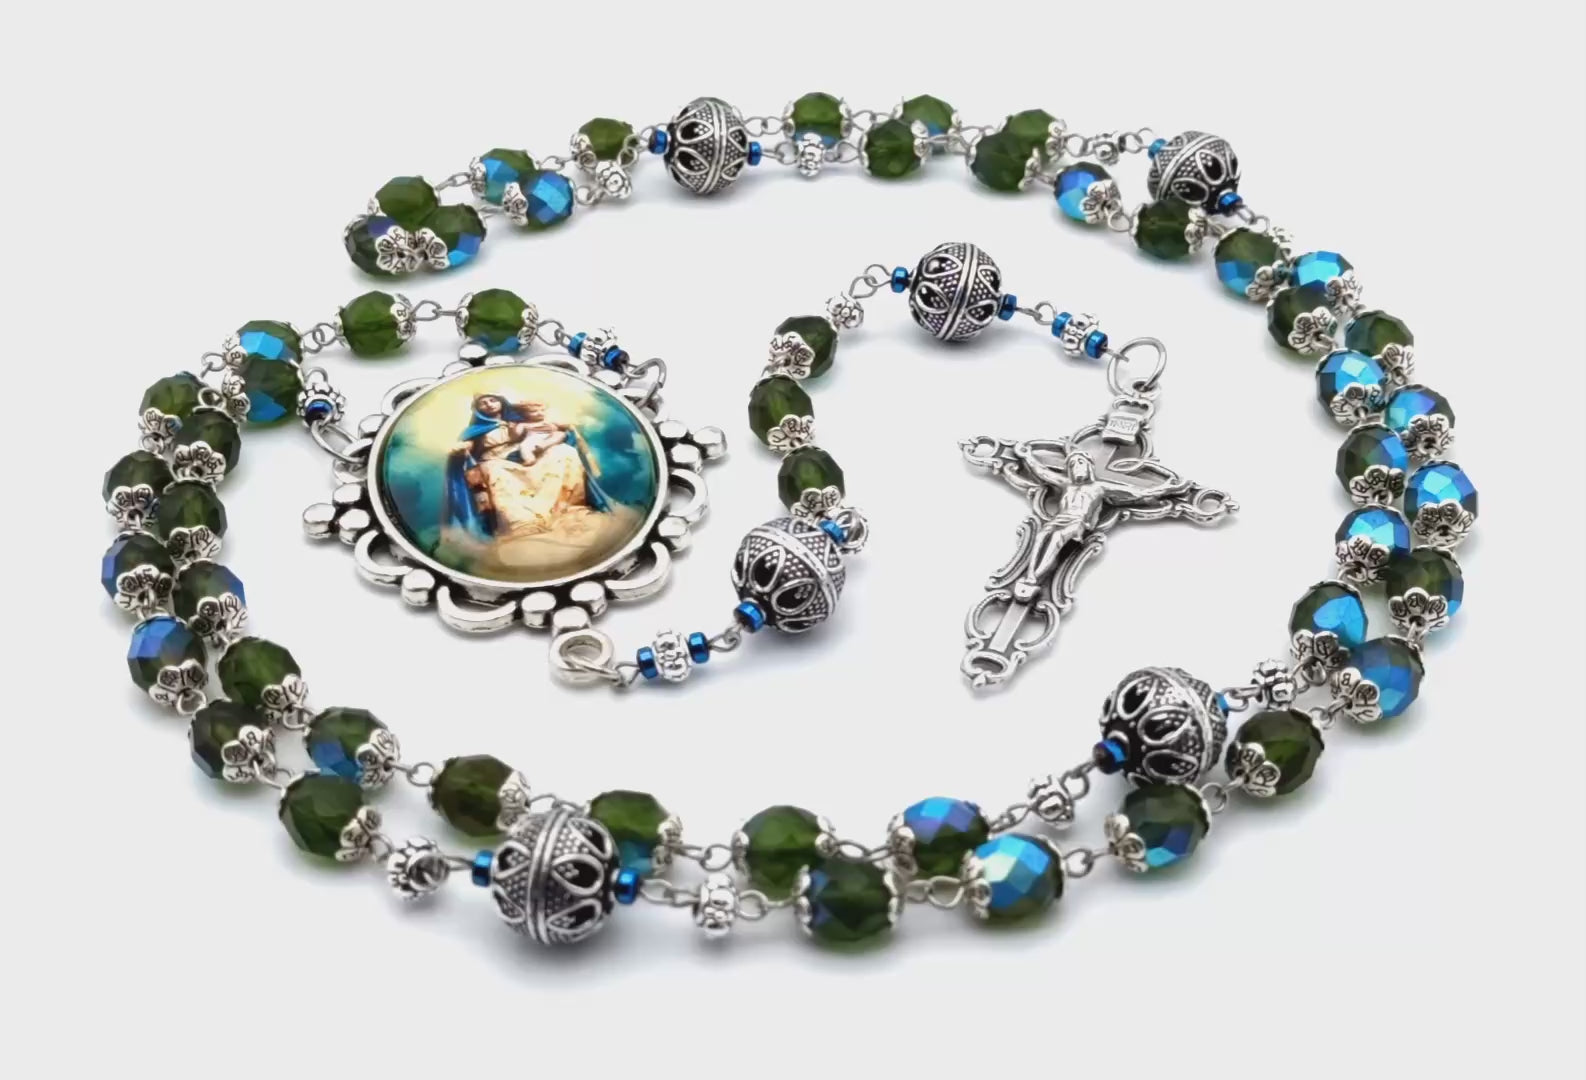 Our Lady of Mount Carmel unique rosary beads with blue green faceted glass and silver beads, filigree crucifix and large picture centre medal.